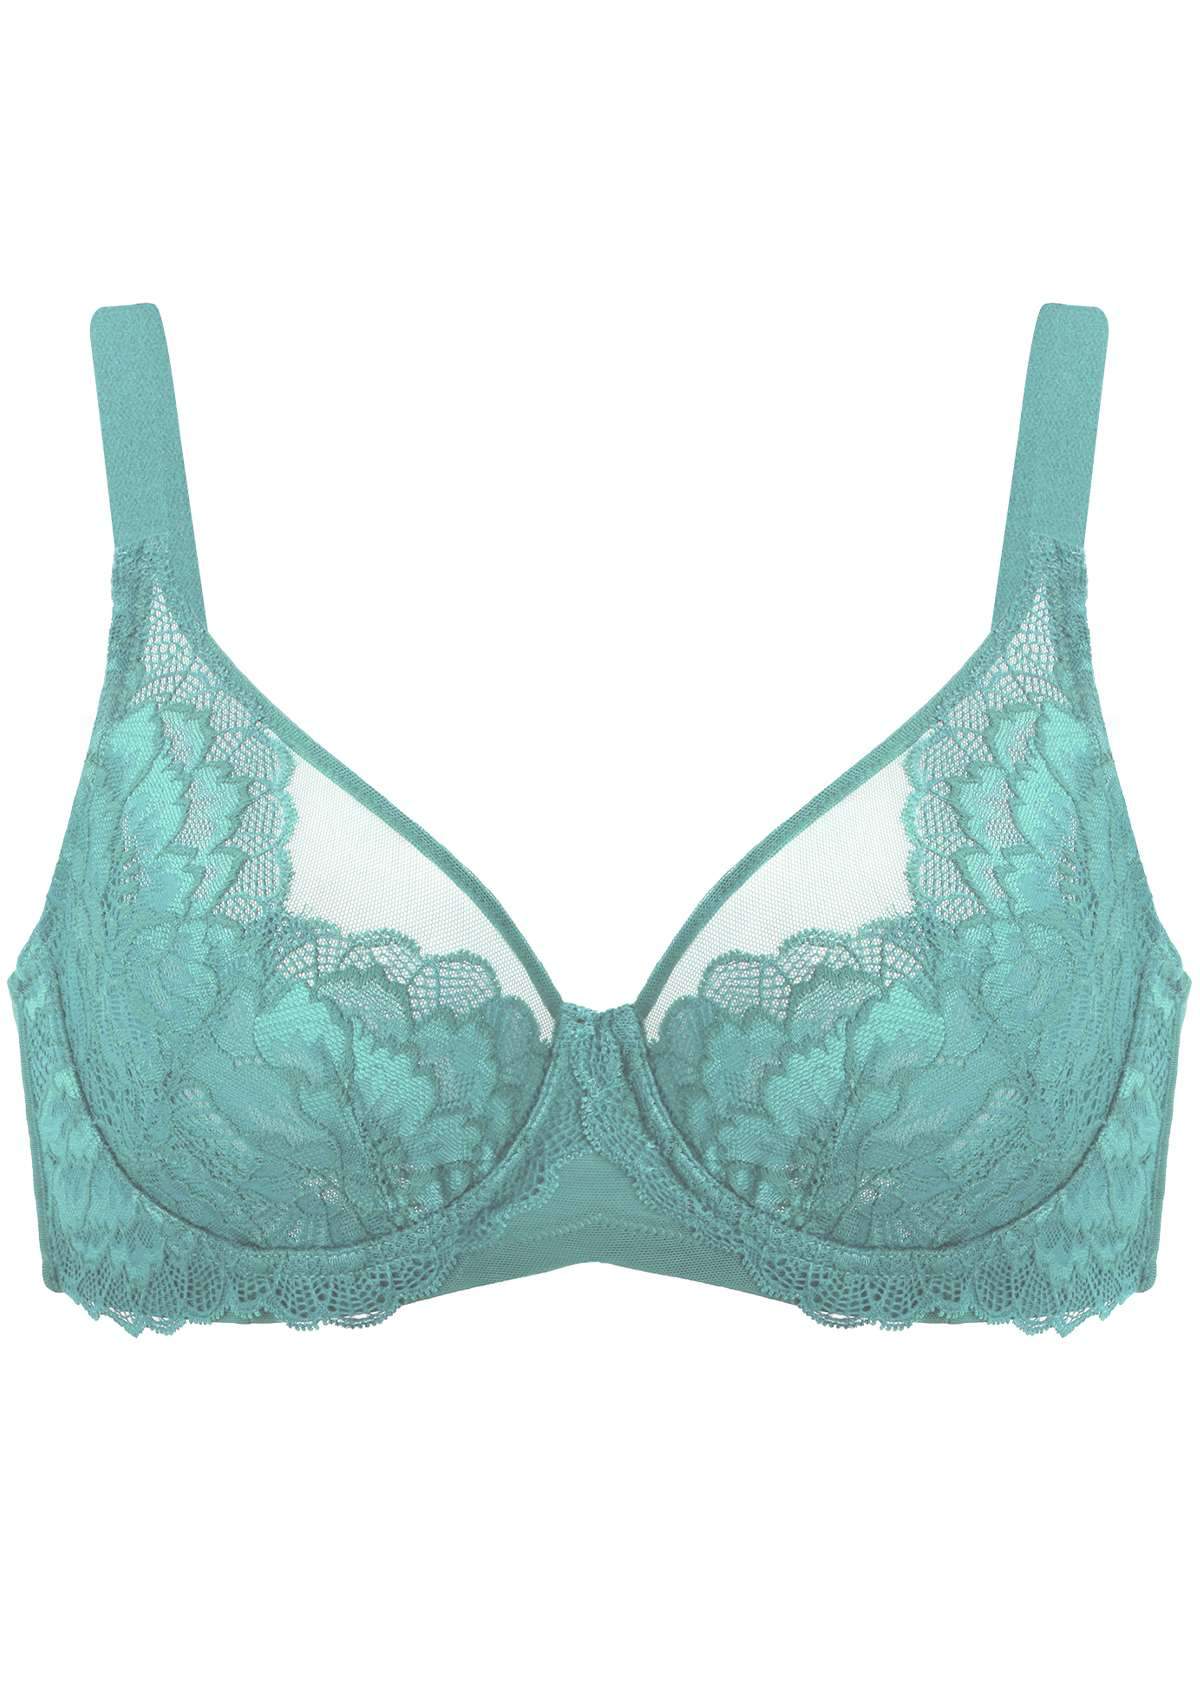 HSIA Paeonia Lace Full Coverage Underwire Non-Padded Uplifting Bra - Teal / 36 / C